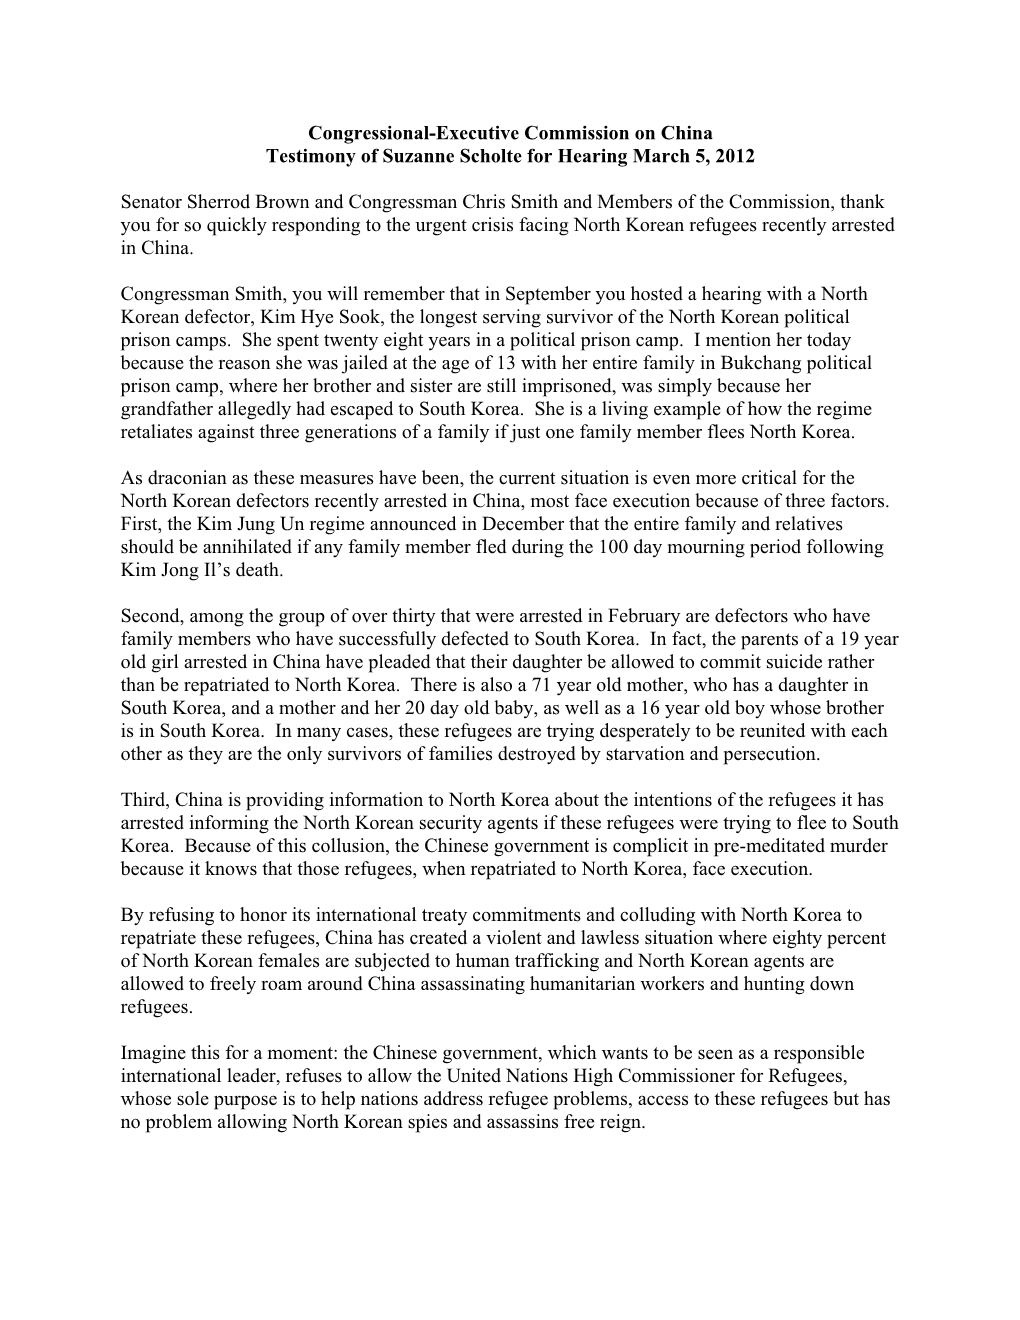 Congressional-Executive Commission on China Testimony of Suzanne Scholte for Hearing March 5, 2012